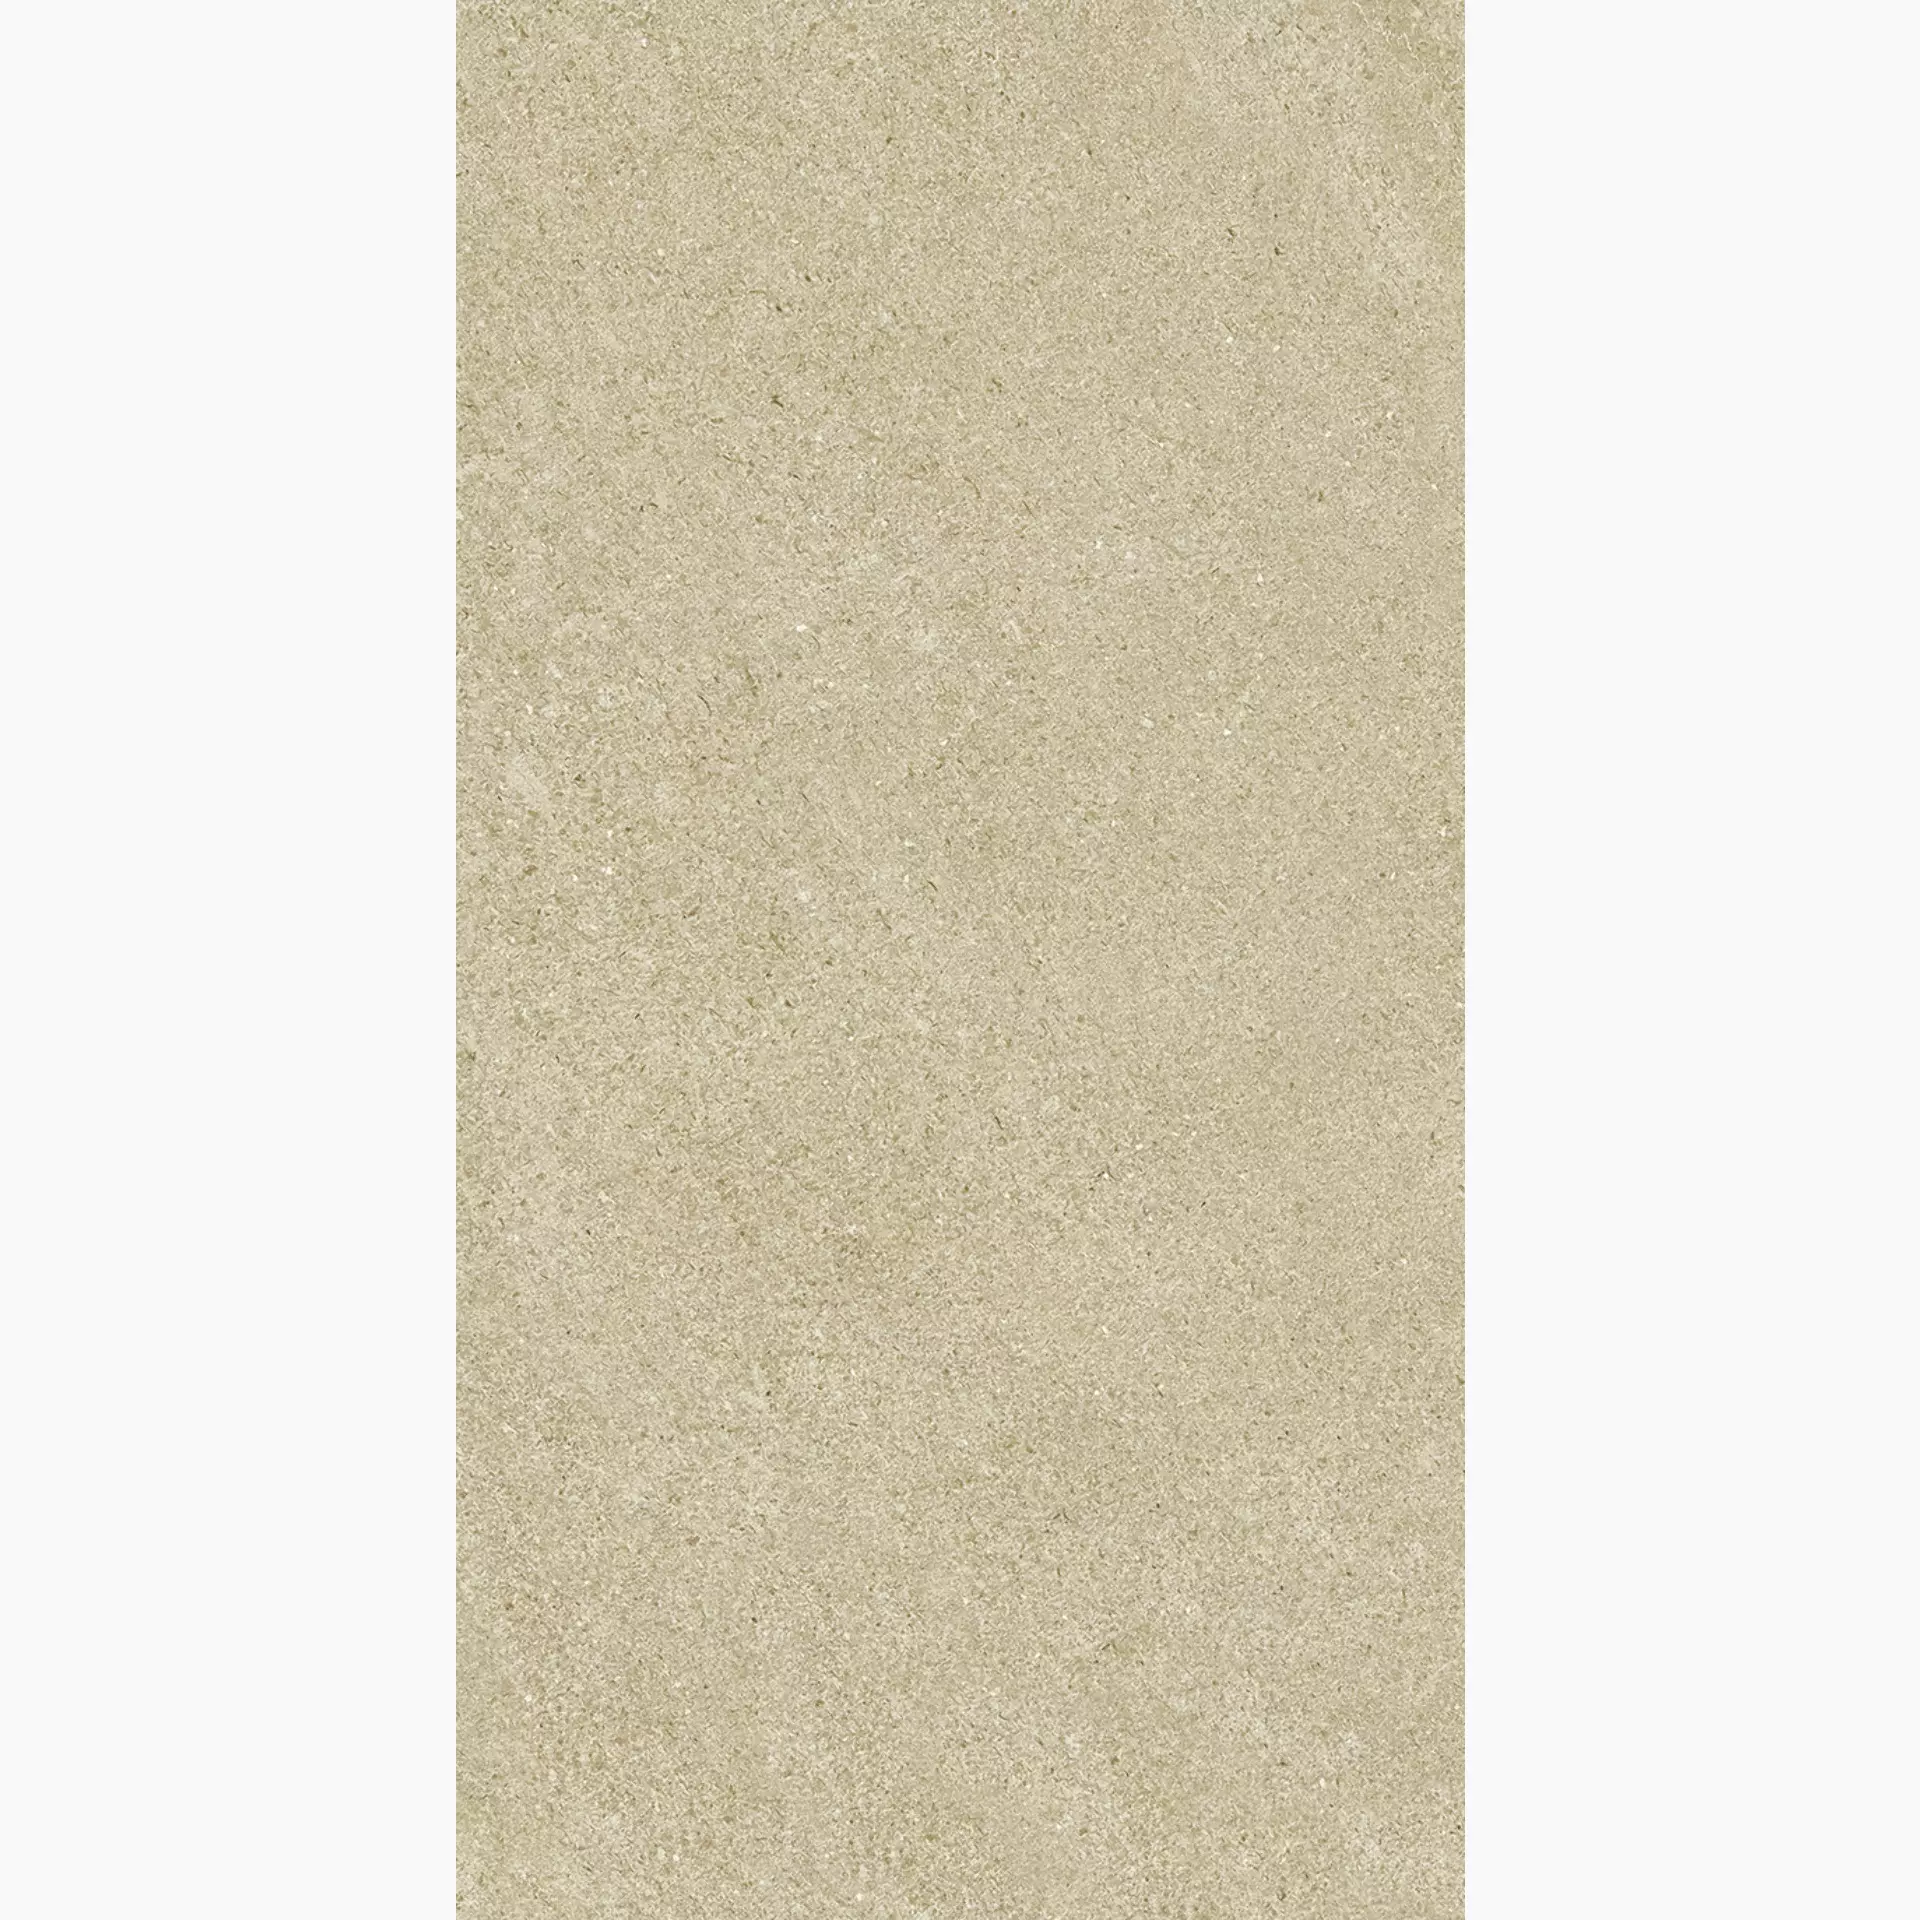 Margres Hybrid Beige Touch B2562HB2T 60x120cm rectified 11mm